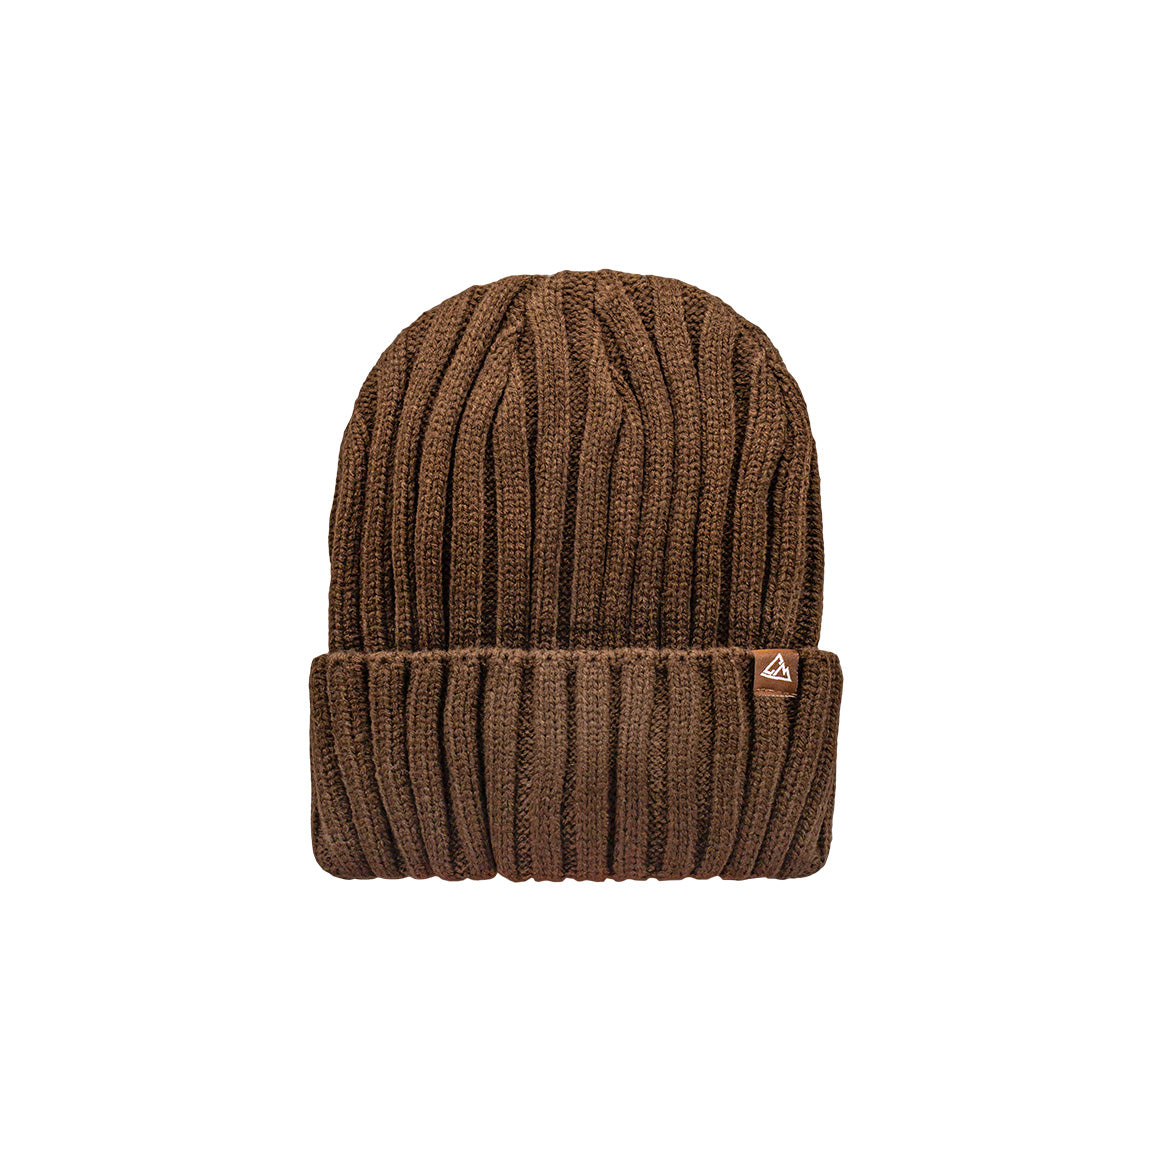 This is a brown ribbed beanie with a fold-over cuff, featuring a small triangular logo patch on the side.